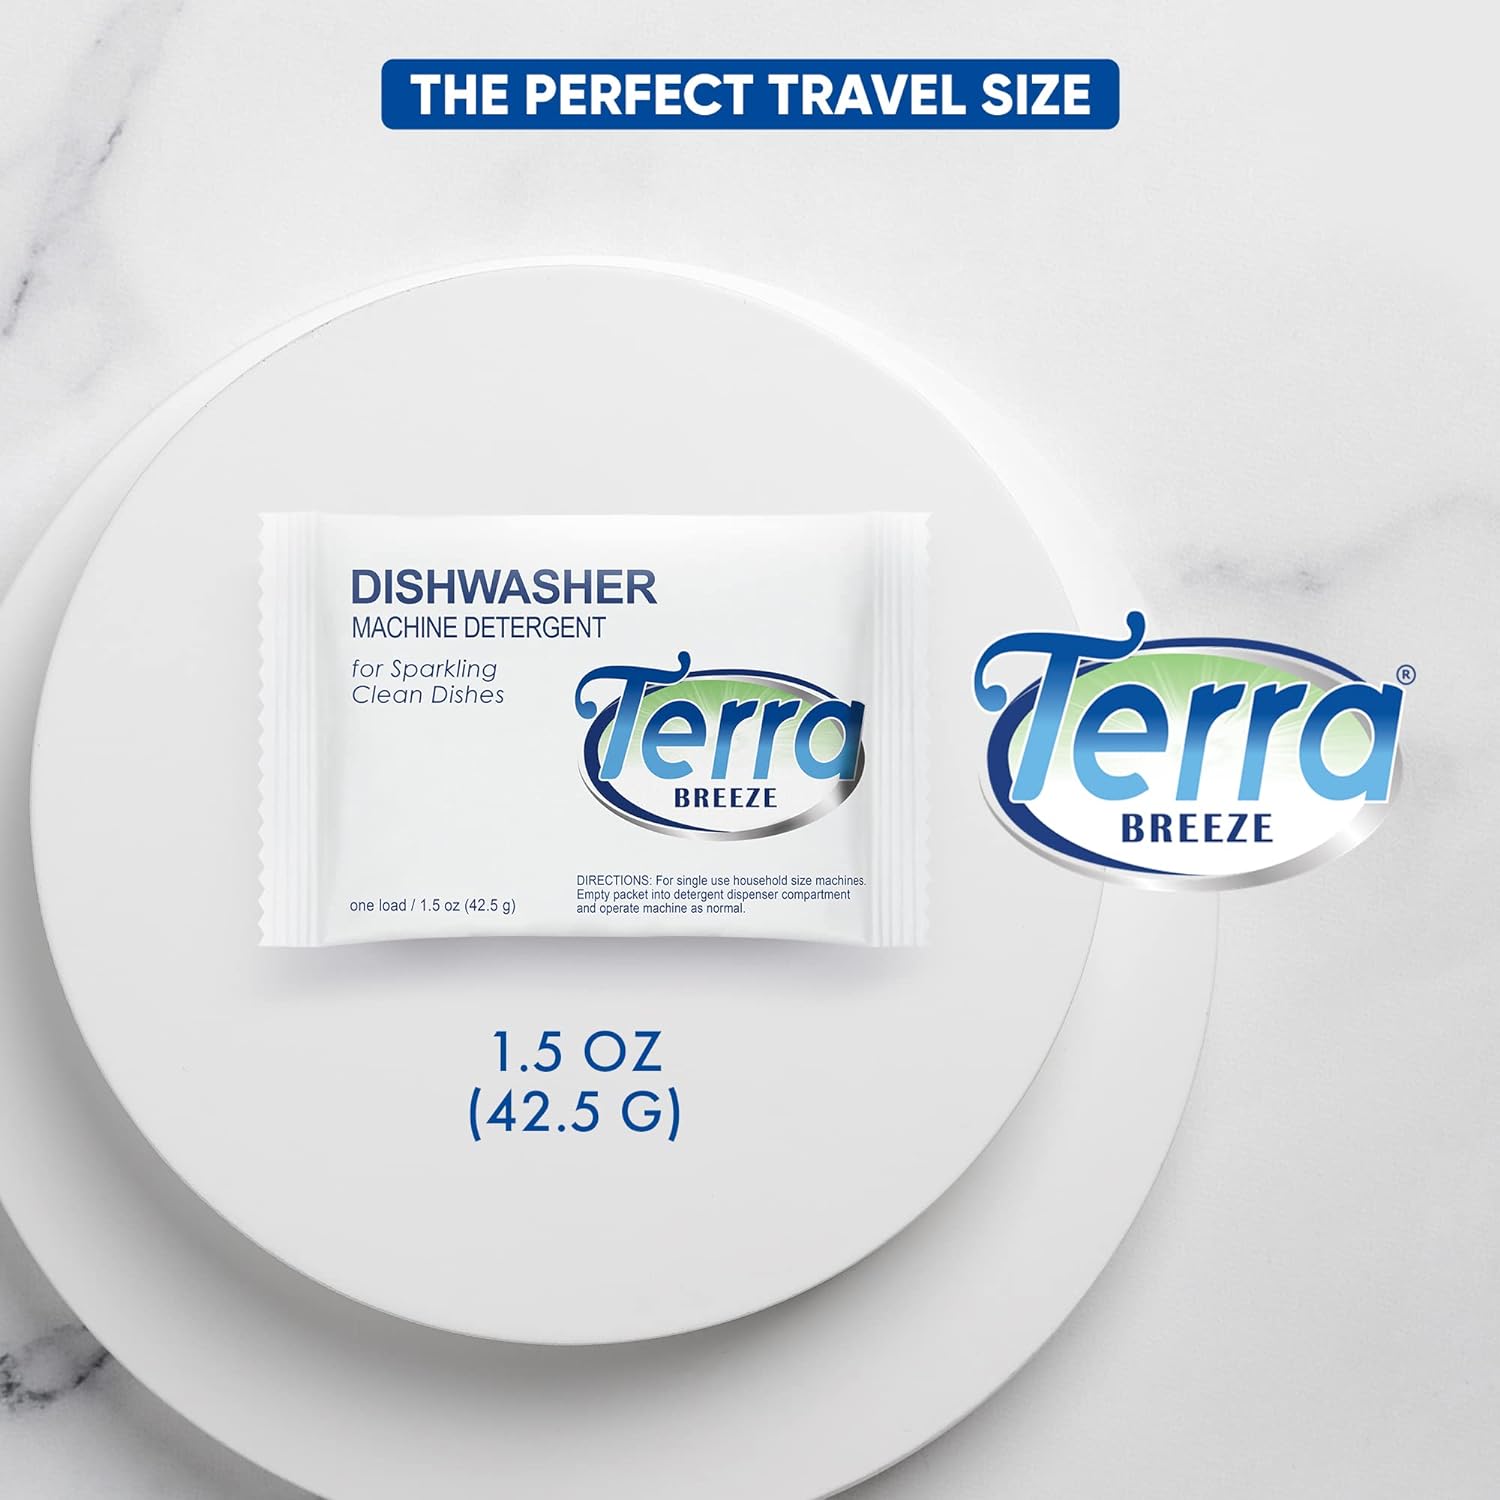 Terra Breeze Automatic Dishwasher Detergent Powder - 1.5 oz Packets (200 packs) : Health & Household